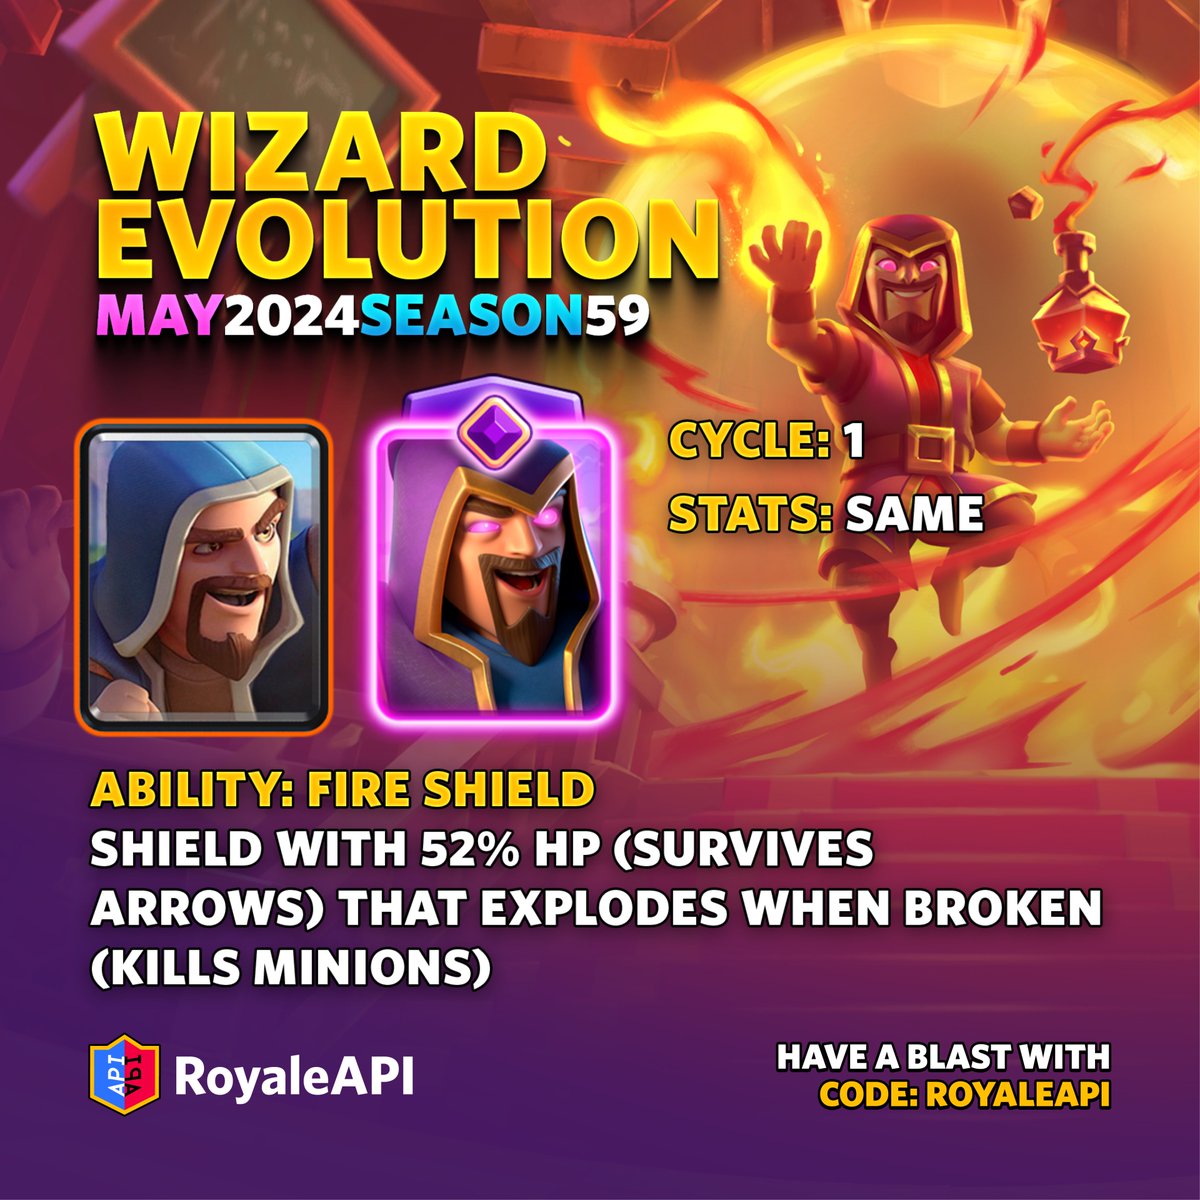 Wizard Evolution - coming to Clash Royale on Monday, May 6, 2024! on.royaleapi.com/wizardevo

👉 Cycle: 1
👉 Stats: Same
👉 Ability: Fire Shield

Shield with 52% HP (survives Arrows) that explodes when broken (kills Minions)